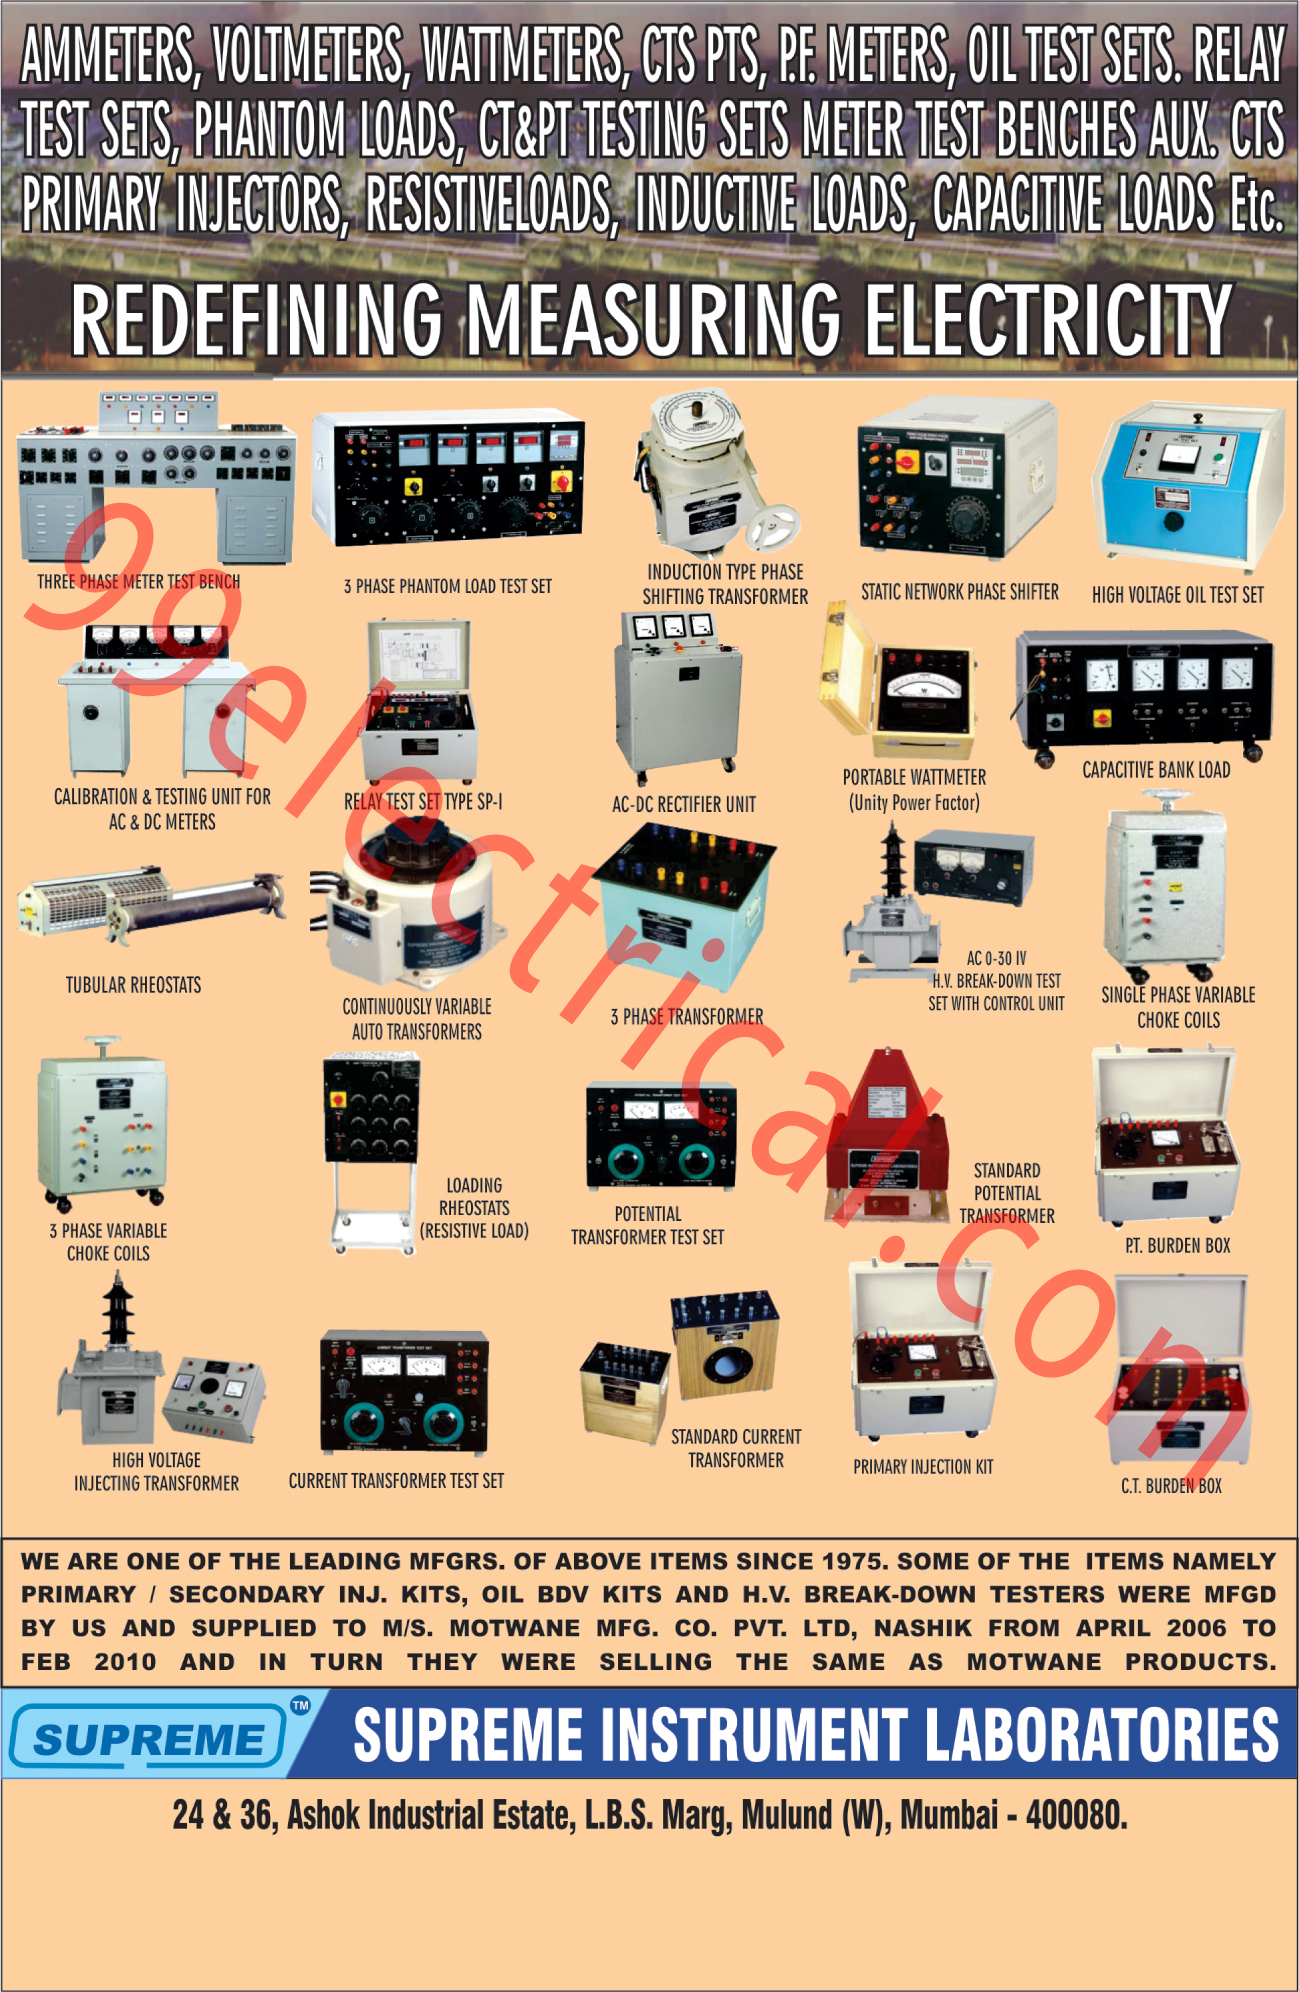 Ammeters, Voltmeters, Volt Meters, Watt meters, PF Meters, Oil Test Sets, Relay Test Sets, Phantom Loads, CT Testing Sets, PT Testing Sets, Three Phase Meter Test Benches, Three Phase Phantom Load Test Sets, Induction Type Phase Shifting Transformers, Static Network Phase Shifters, AC Meter Calibrations, DC Meter Calibrations, AC Meter Testing Units, DC Meter Testing Units, Ac DC Rectifier Units, Portable Wattmeters, Capacitive Bank Loads, Tubular Rheostats, Continuously Variable Auto Transformers, Three Phase Transformers, HV Break Down Test Set With Control Units, Single Phase Variable Choke Coils, Three Phase Variable Choke Coils, Loading Rheostats, potential Transformer Test Sets, Standard Potential Transformers,  PT Burden Boxes, Voltage Injecting Transformers, Current Transformer Test Sets, Current Transformers, Primary Injection Kits, CT Burden Boxes, Inductive Loads, Capacitive Loads, Restive Loads,Meters,Cts, Pts, Oil Test Set, Resistive Loads, Electrical Measuring Instruments, Transformer, AC DC Retifier Unit, Testing Unit, Meter Test Bench, CT PT Testing Sets, Standard Current Transformers